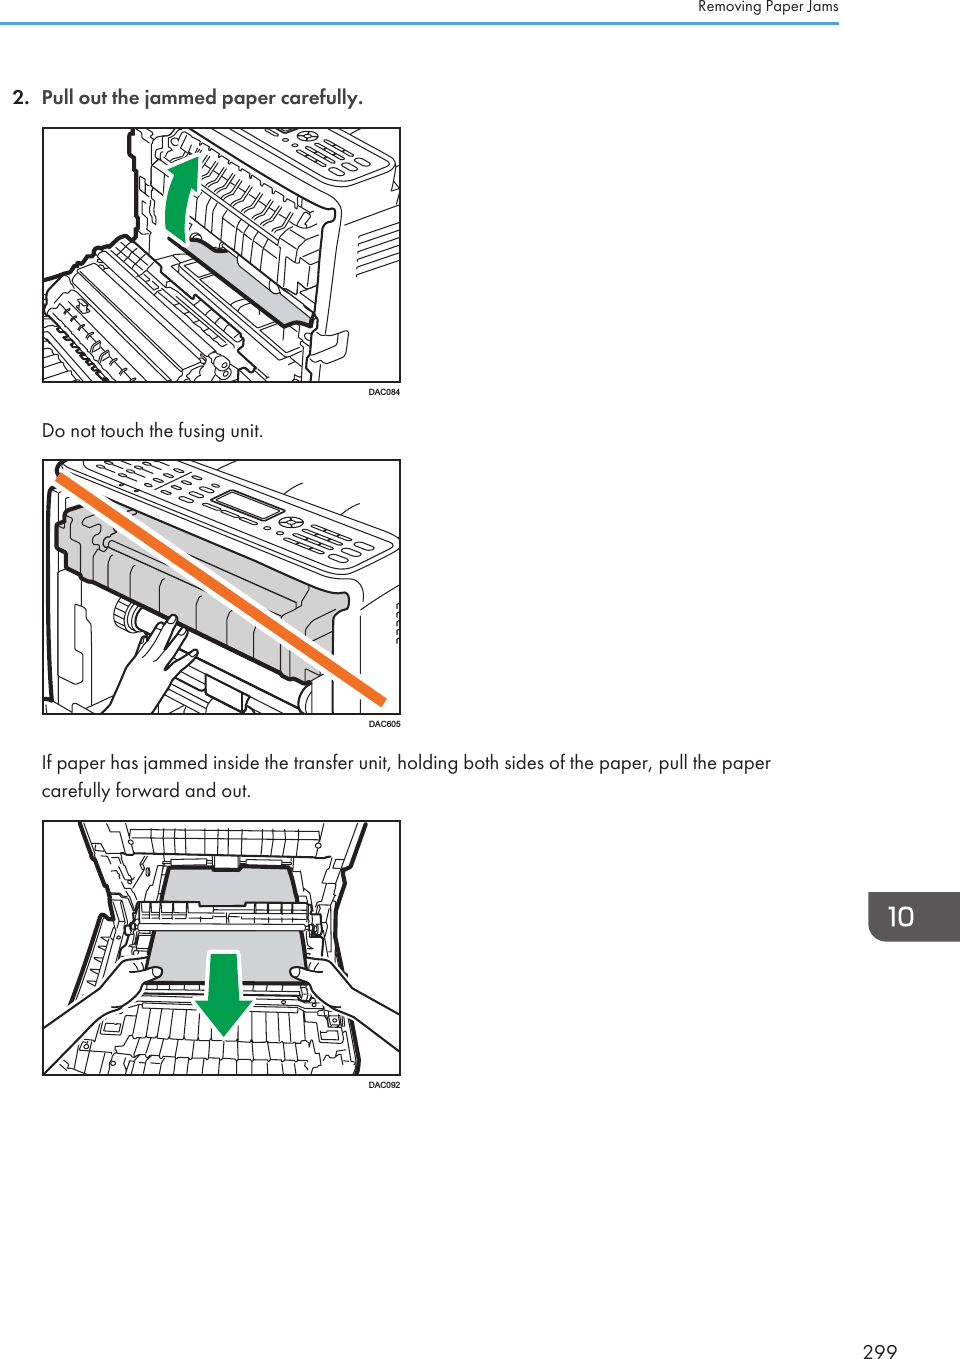 2. Pull out the jammed paper carefully.DAC084Do not touch the fusing unit.DAC605If paper has jammed inside the transfer unit, holding both sides of the paper, pull the papercarefully forward and out.DAC092Removing Paper Jams299